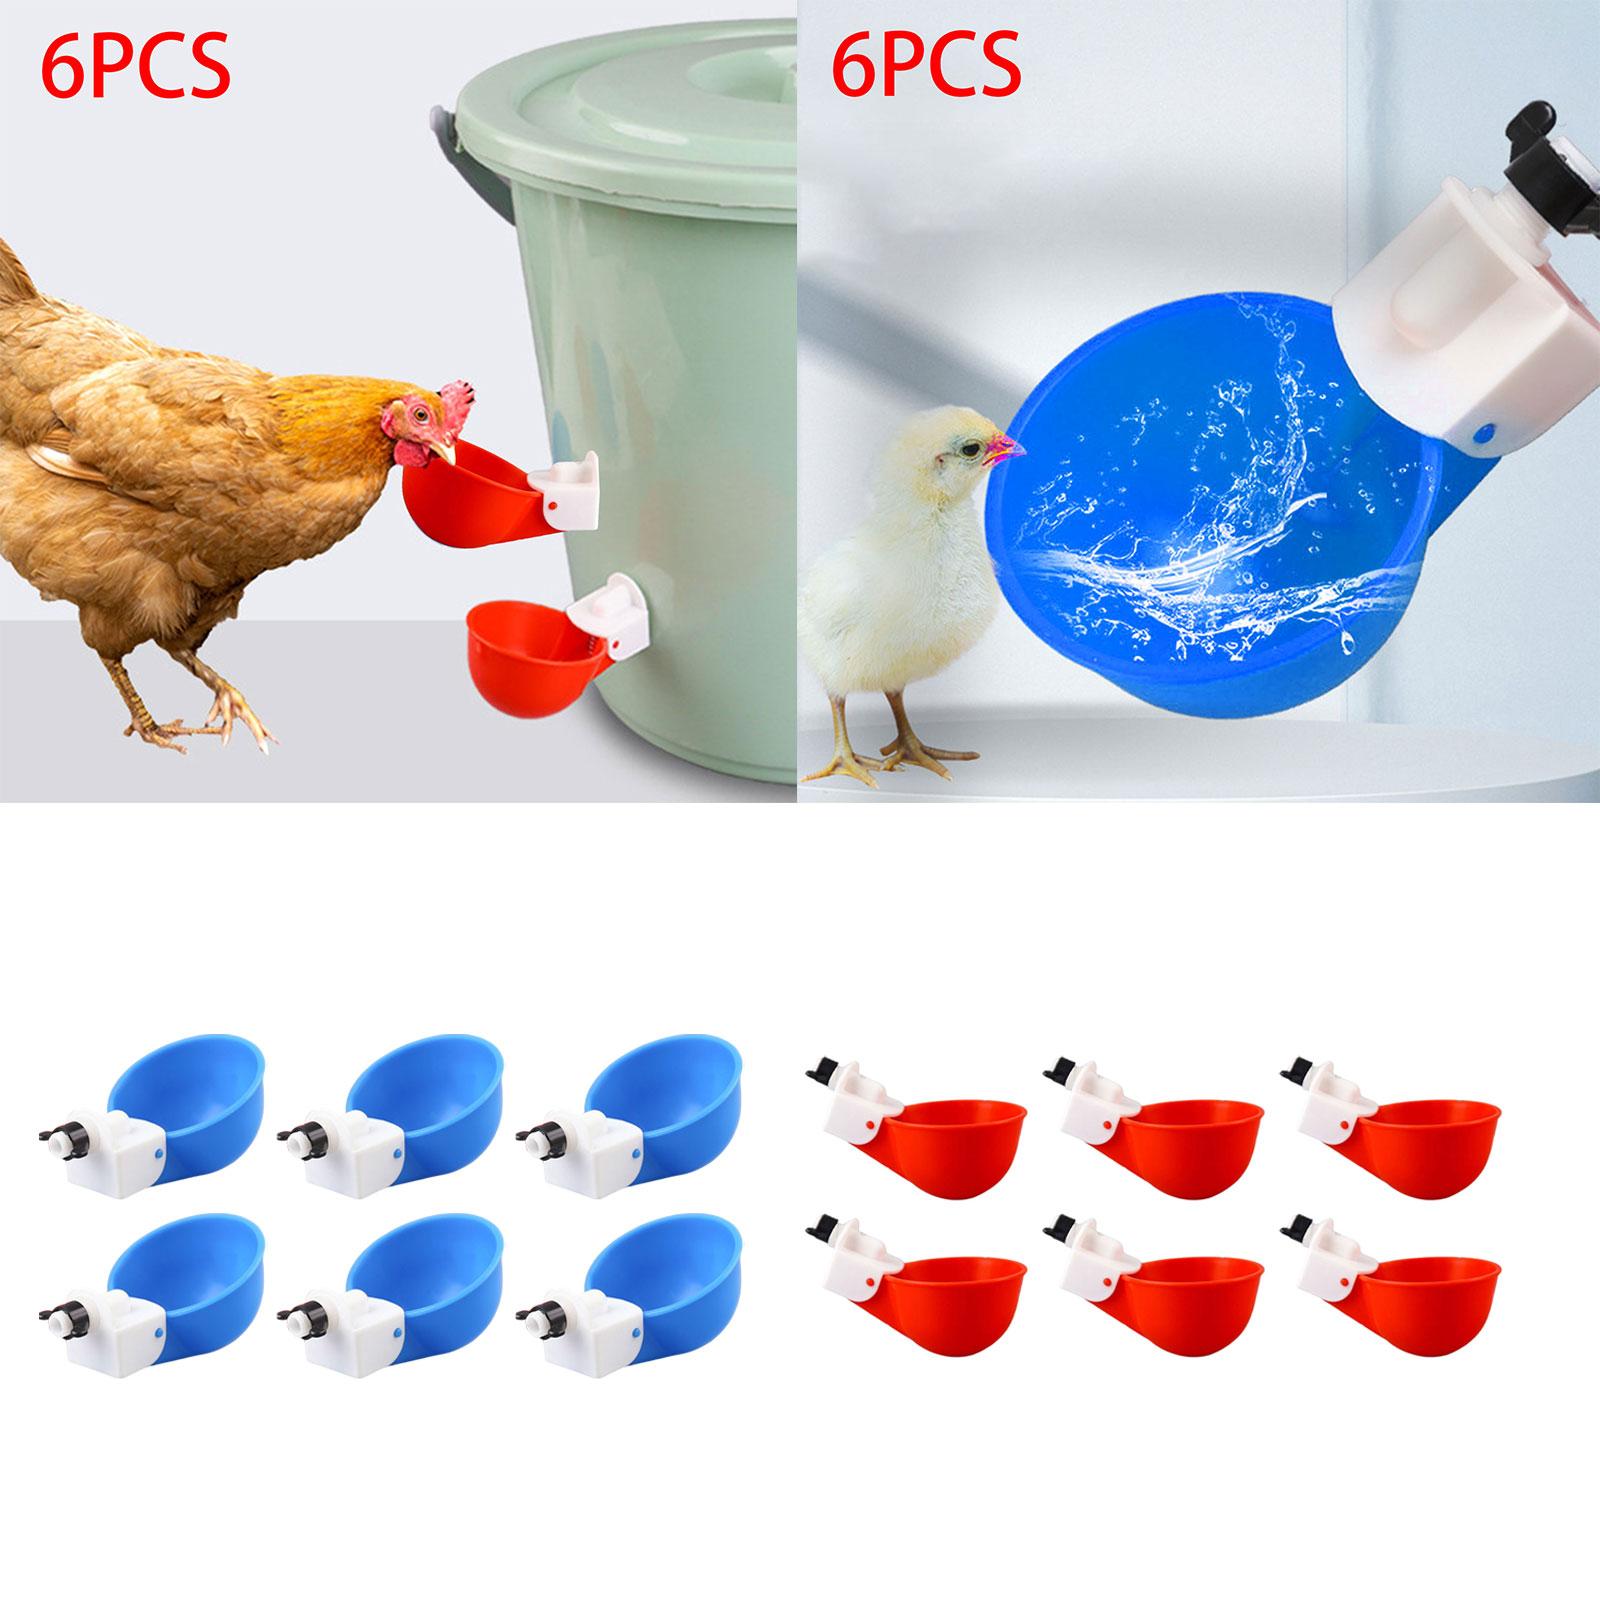 6Pcs Chicken Feeders Chicken Watering Cup Chicken Waterer for Birds Quail Red